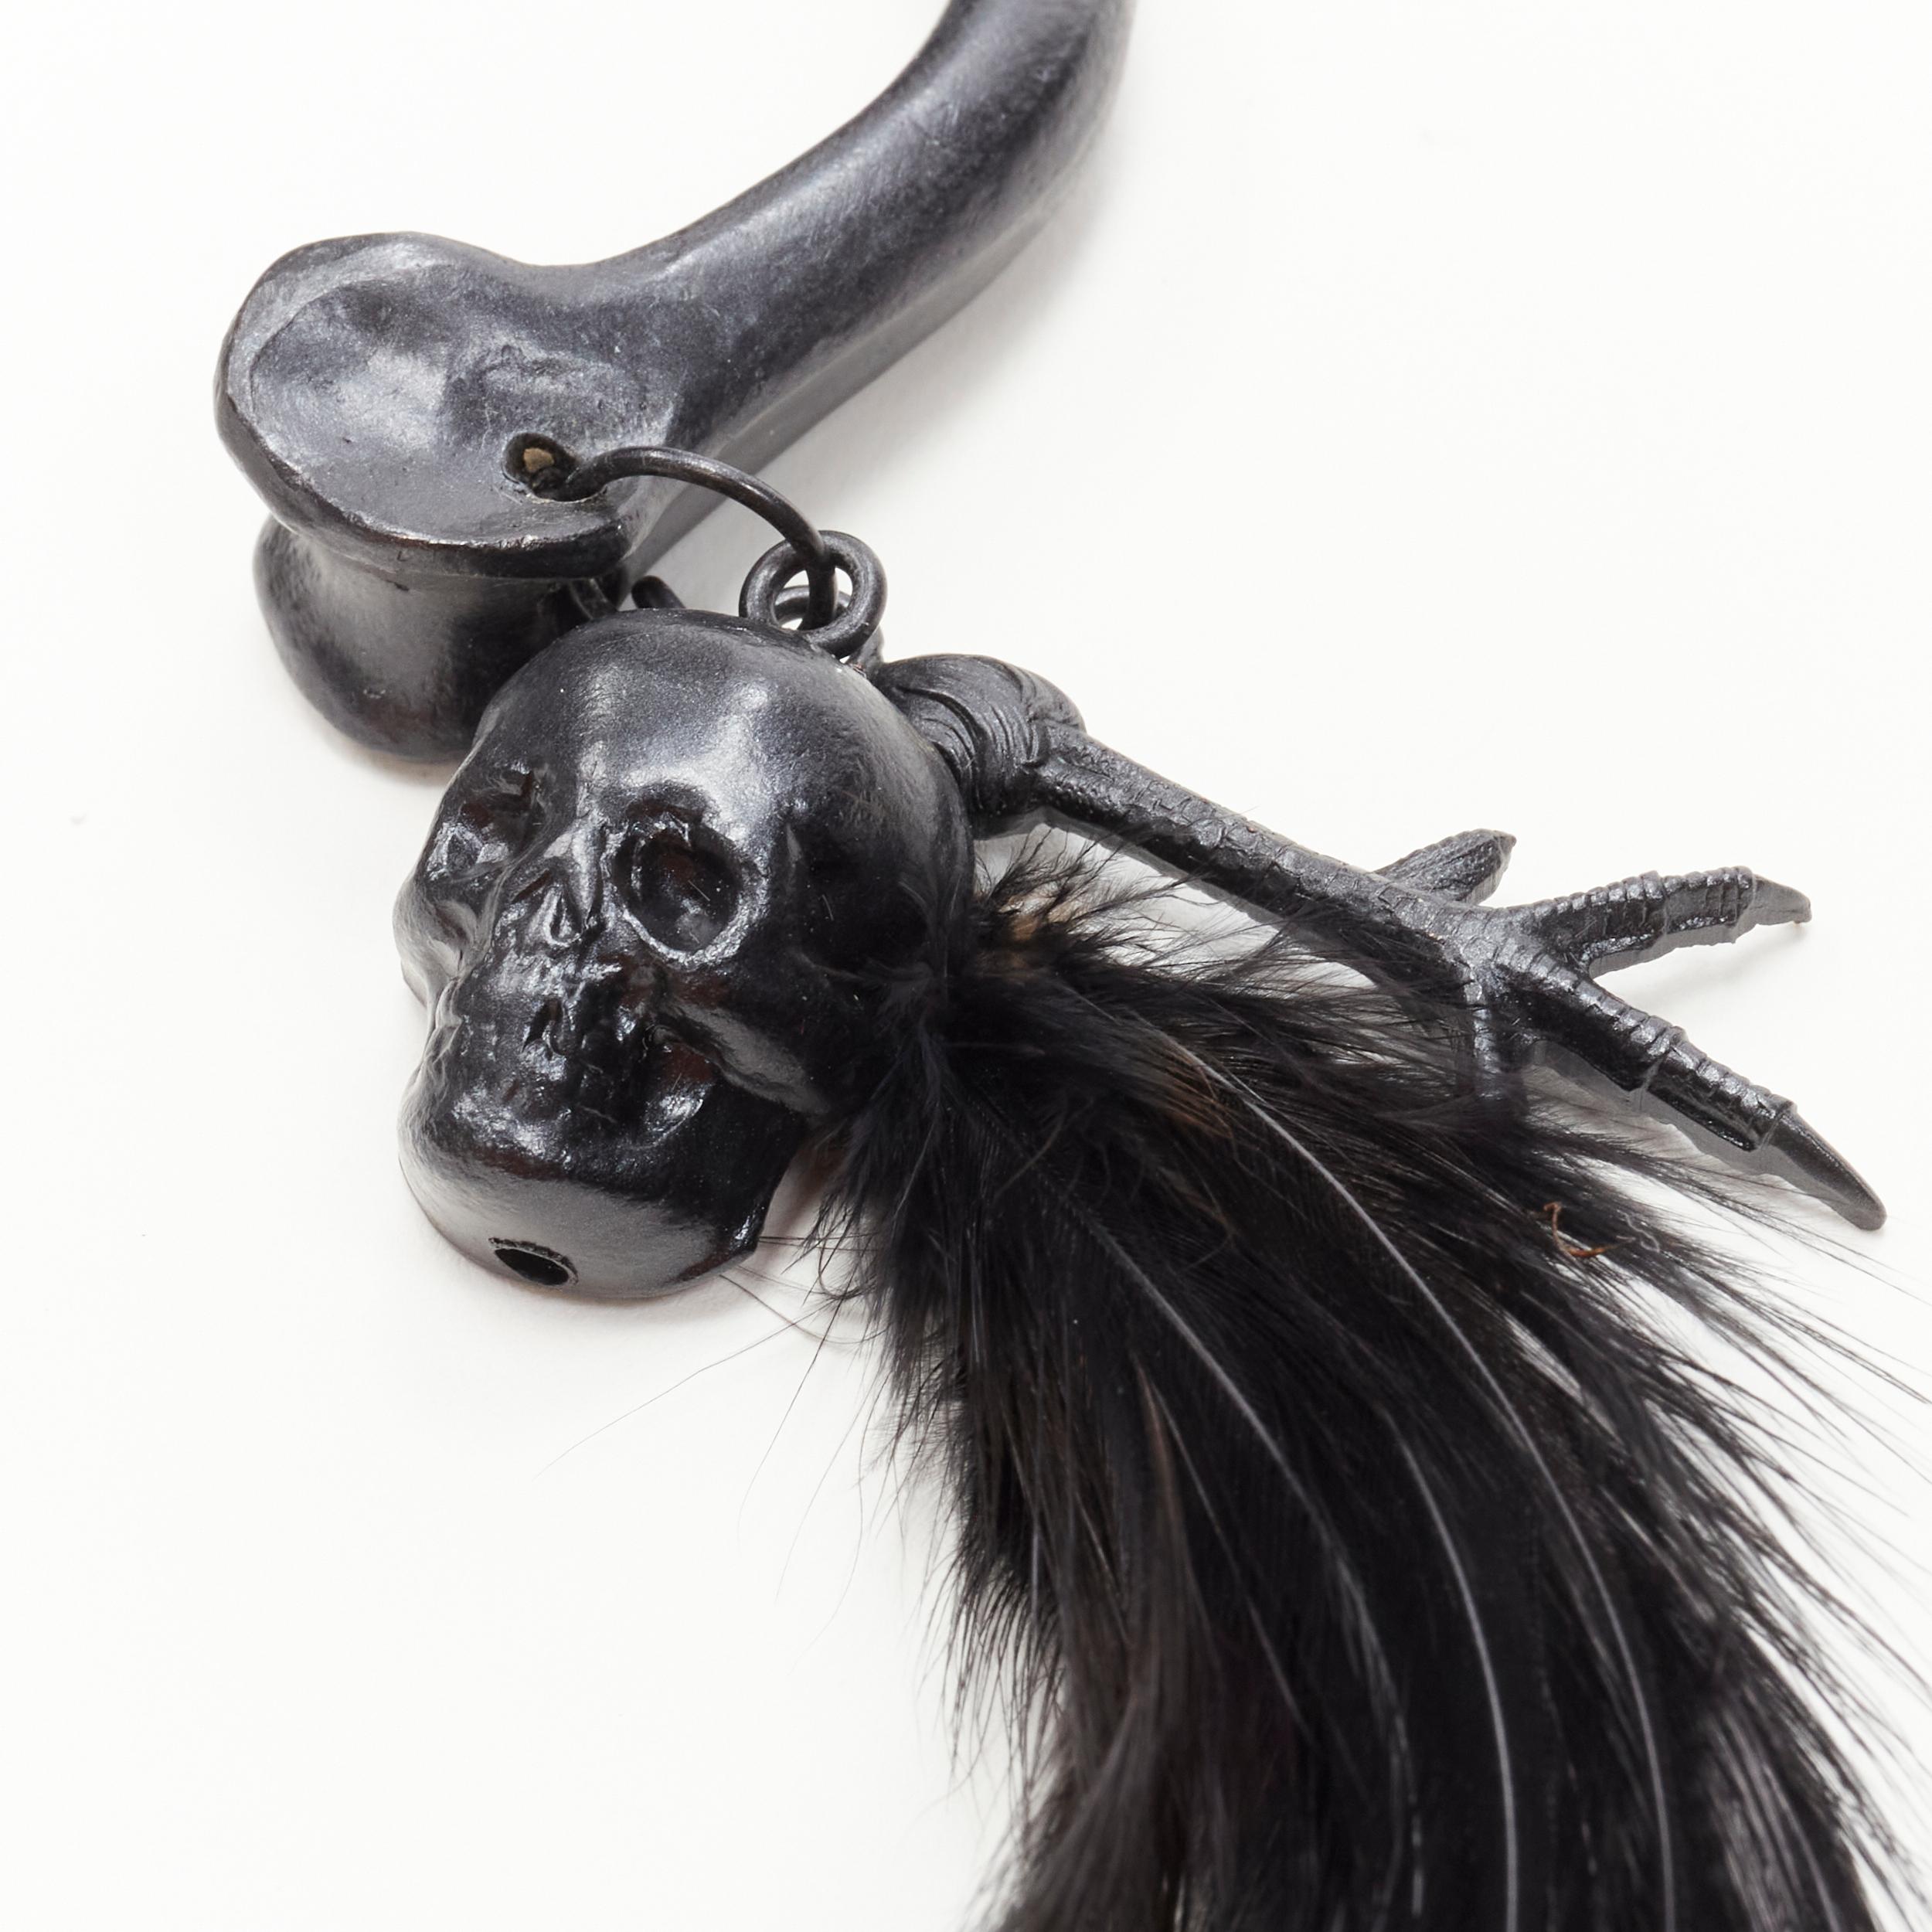 VL PARIS black metal skull raven claw feather goth bone bangle
Reference: ANWU/A00307
Brand: VL Paris
Material: Metal, Feather
Color: Black
Pattern: Animal Print
Closure: Pull On
Extra Details: Embossed logo on end of bone shaped